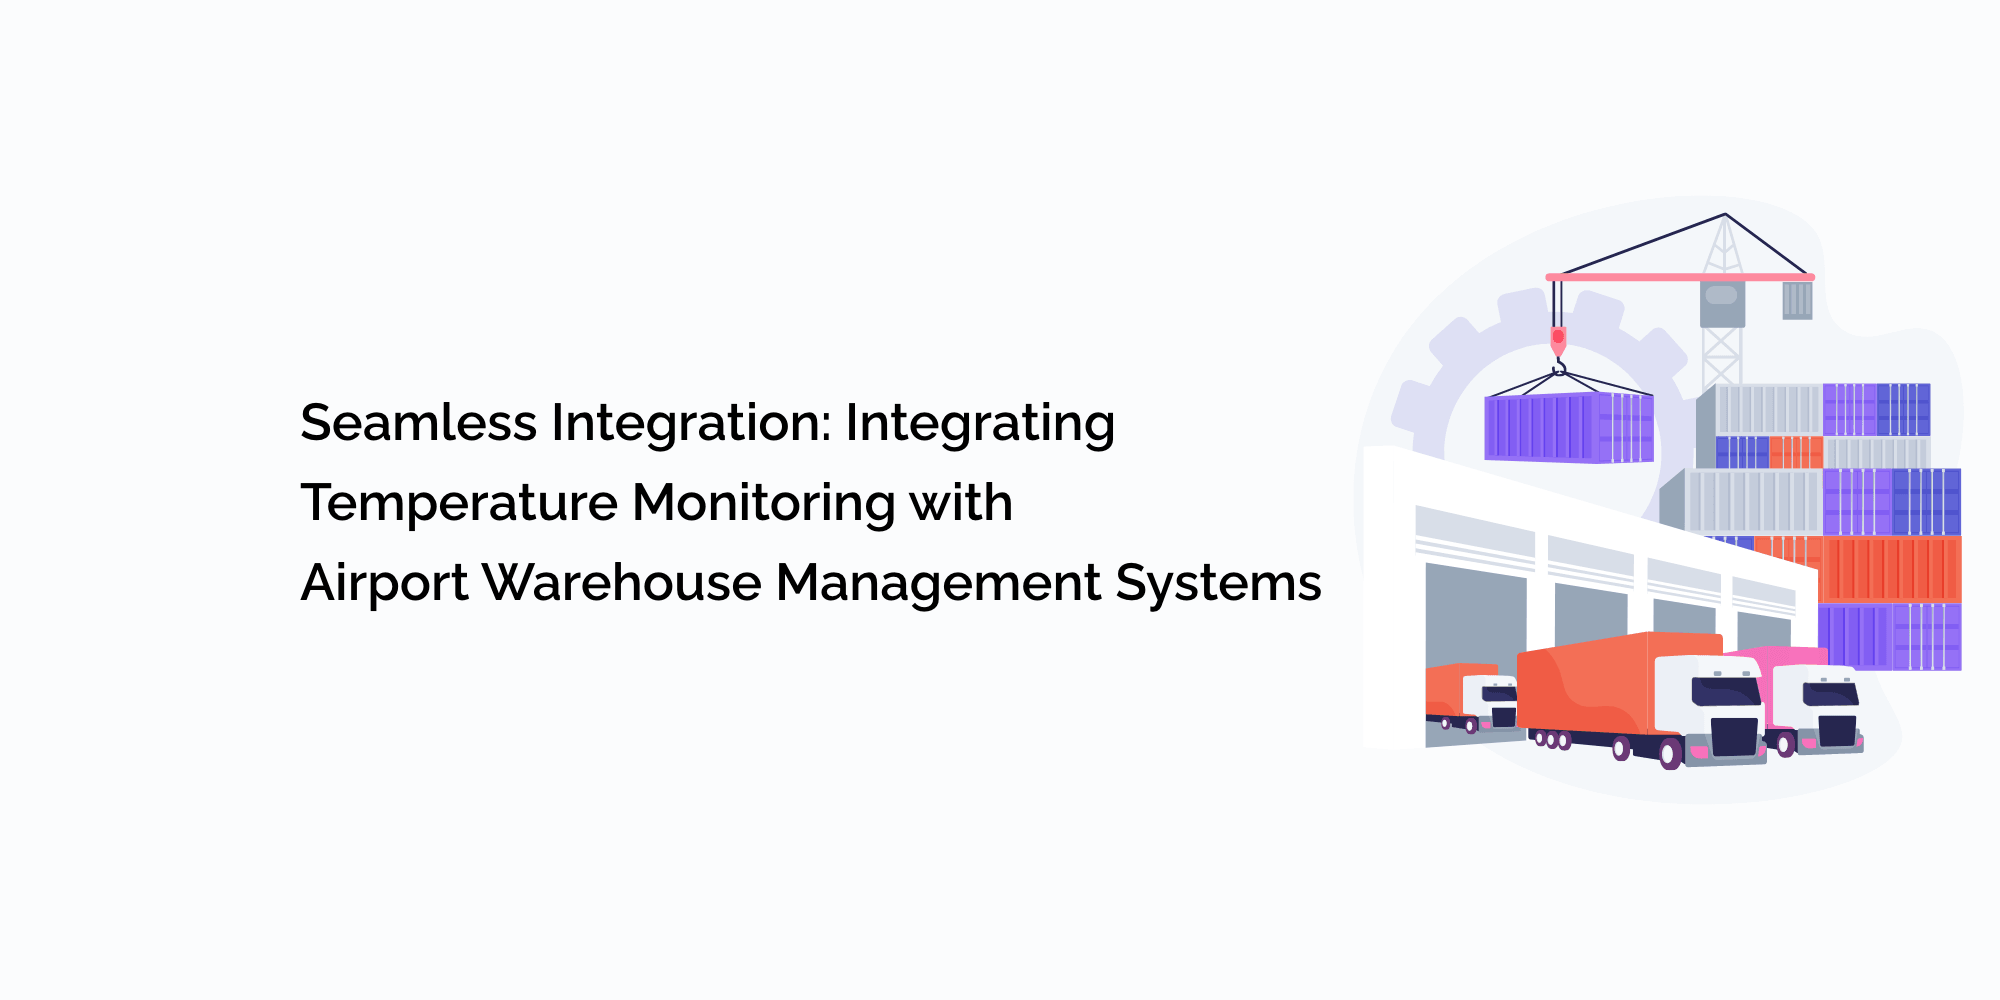 Seamless Integration: Integrating Temperature Monitoring with Airport Warehouse Management Systems